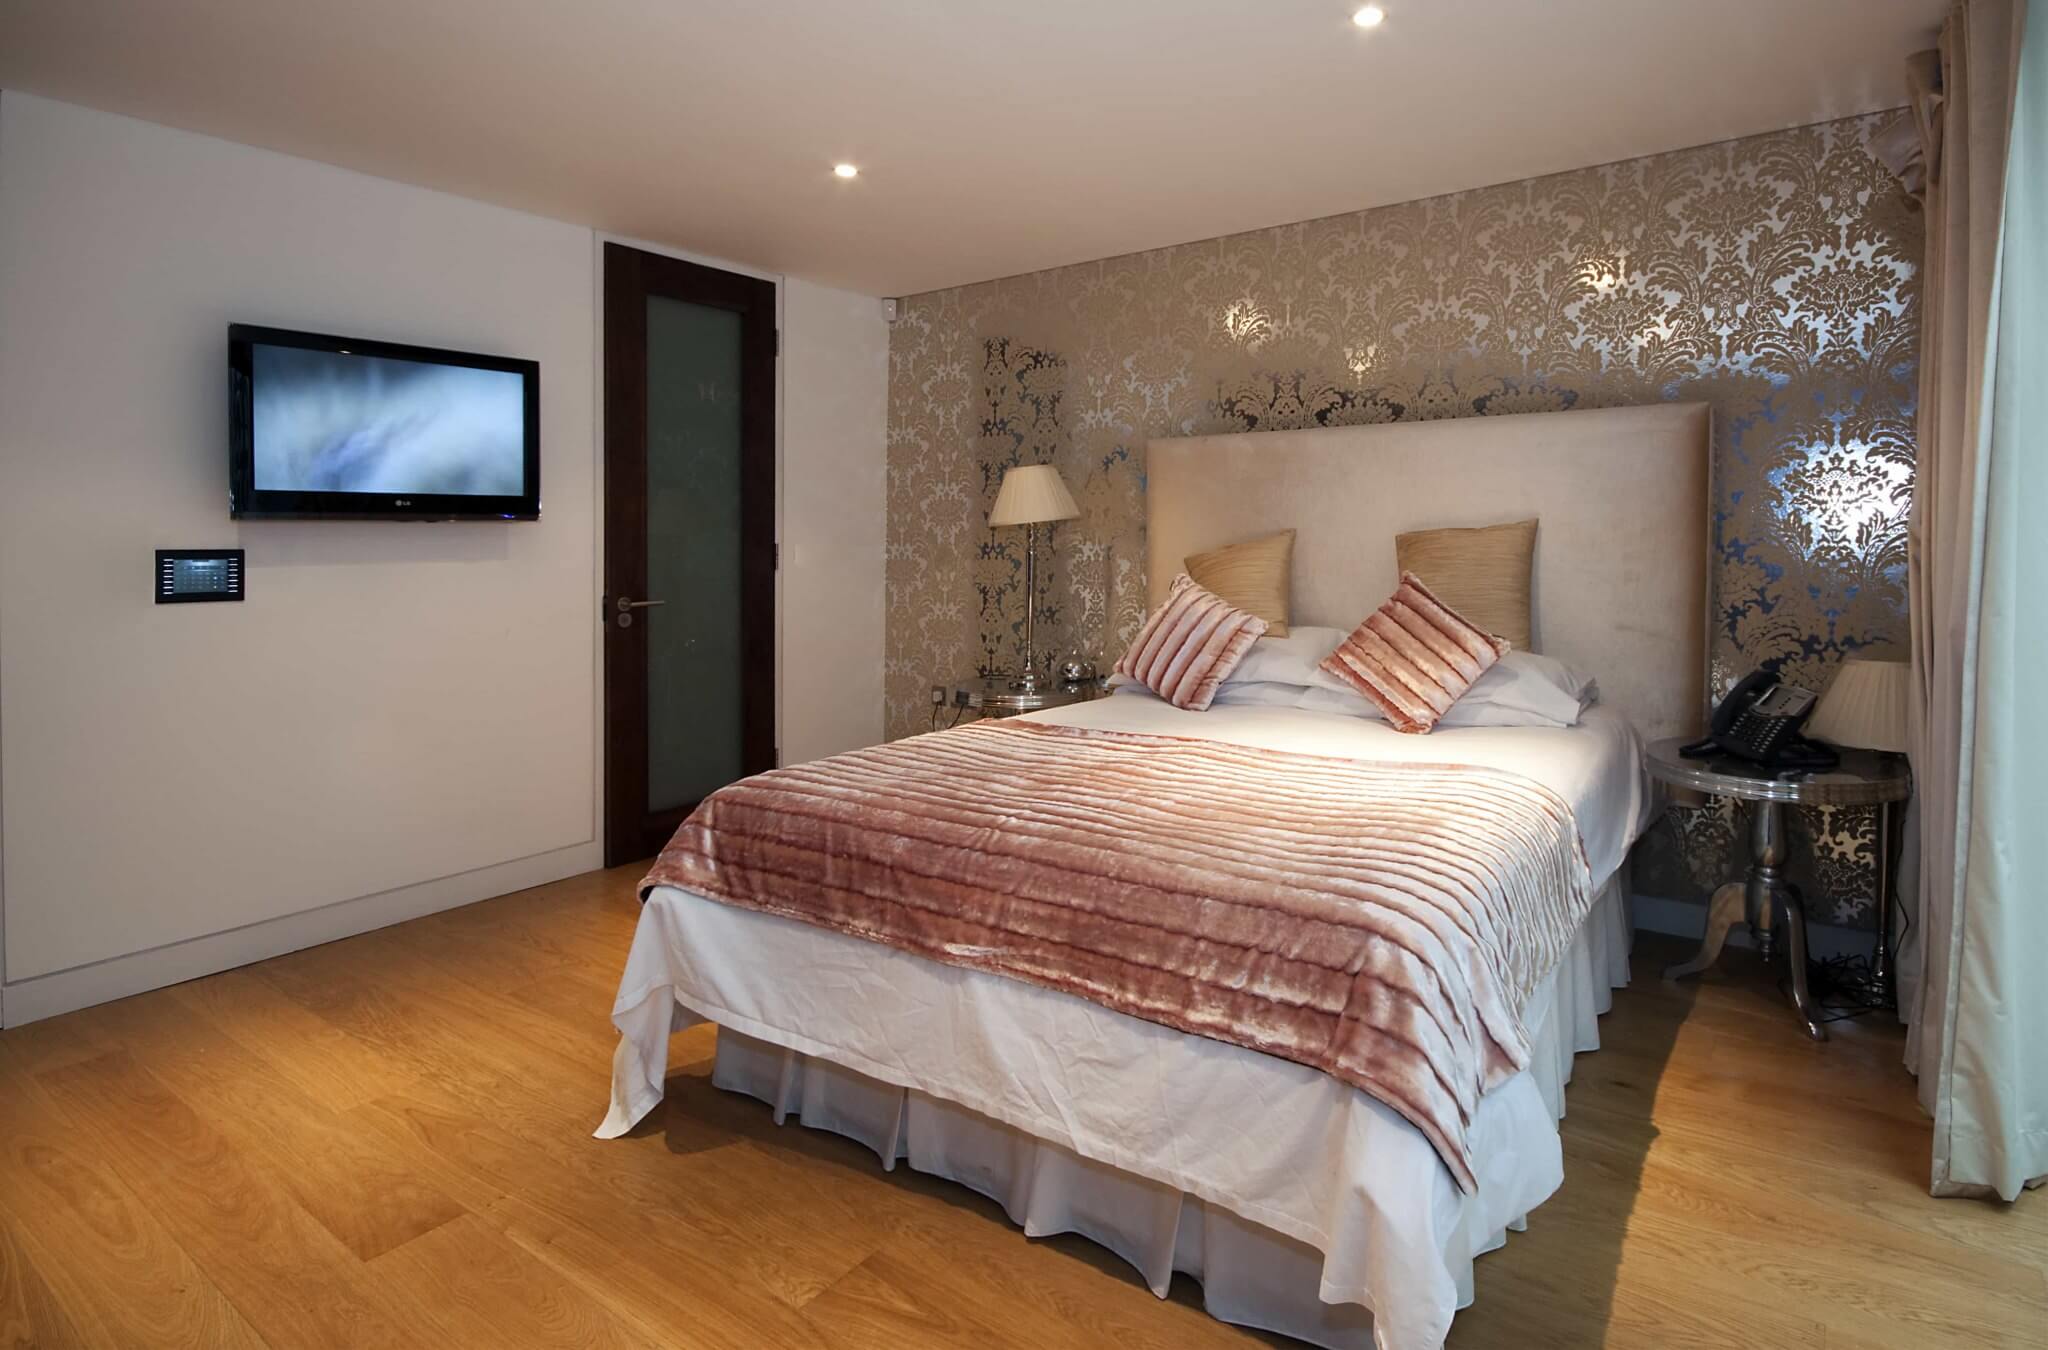 Bedroom AV System with Crestron Touchpanel